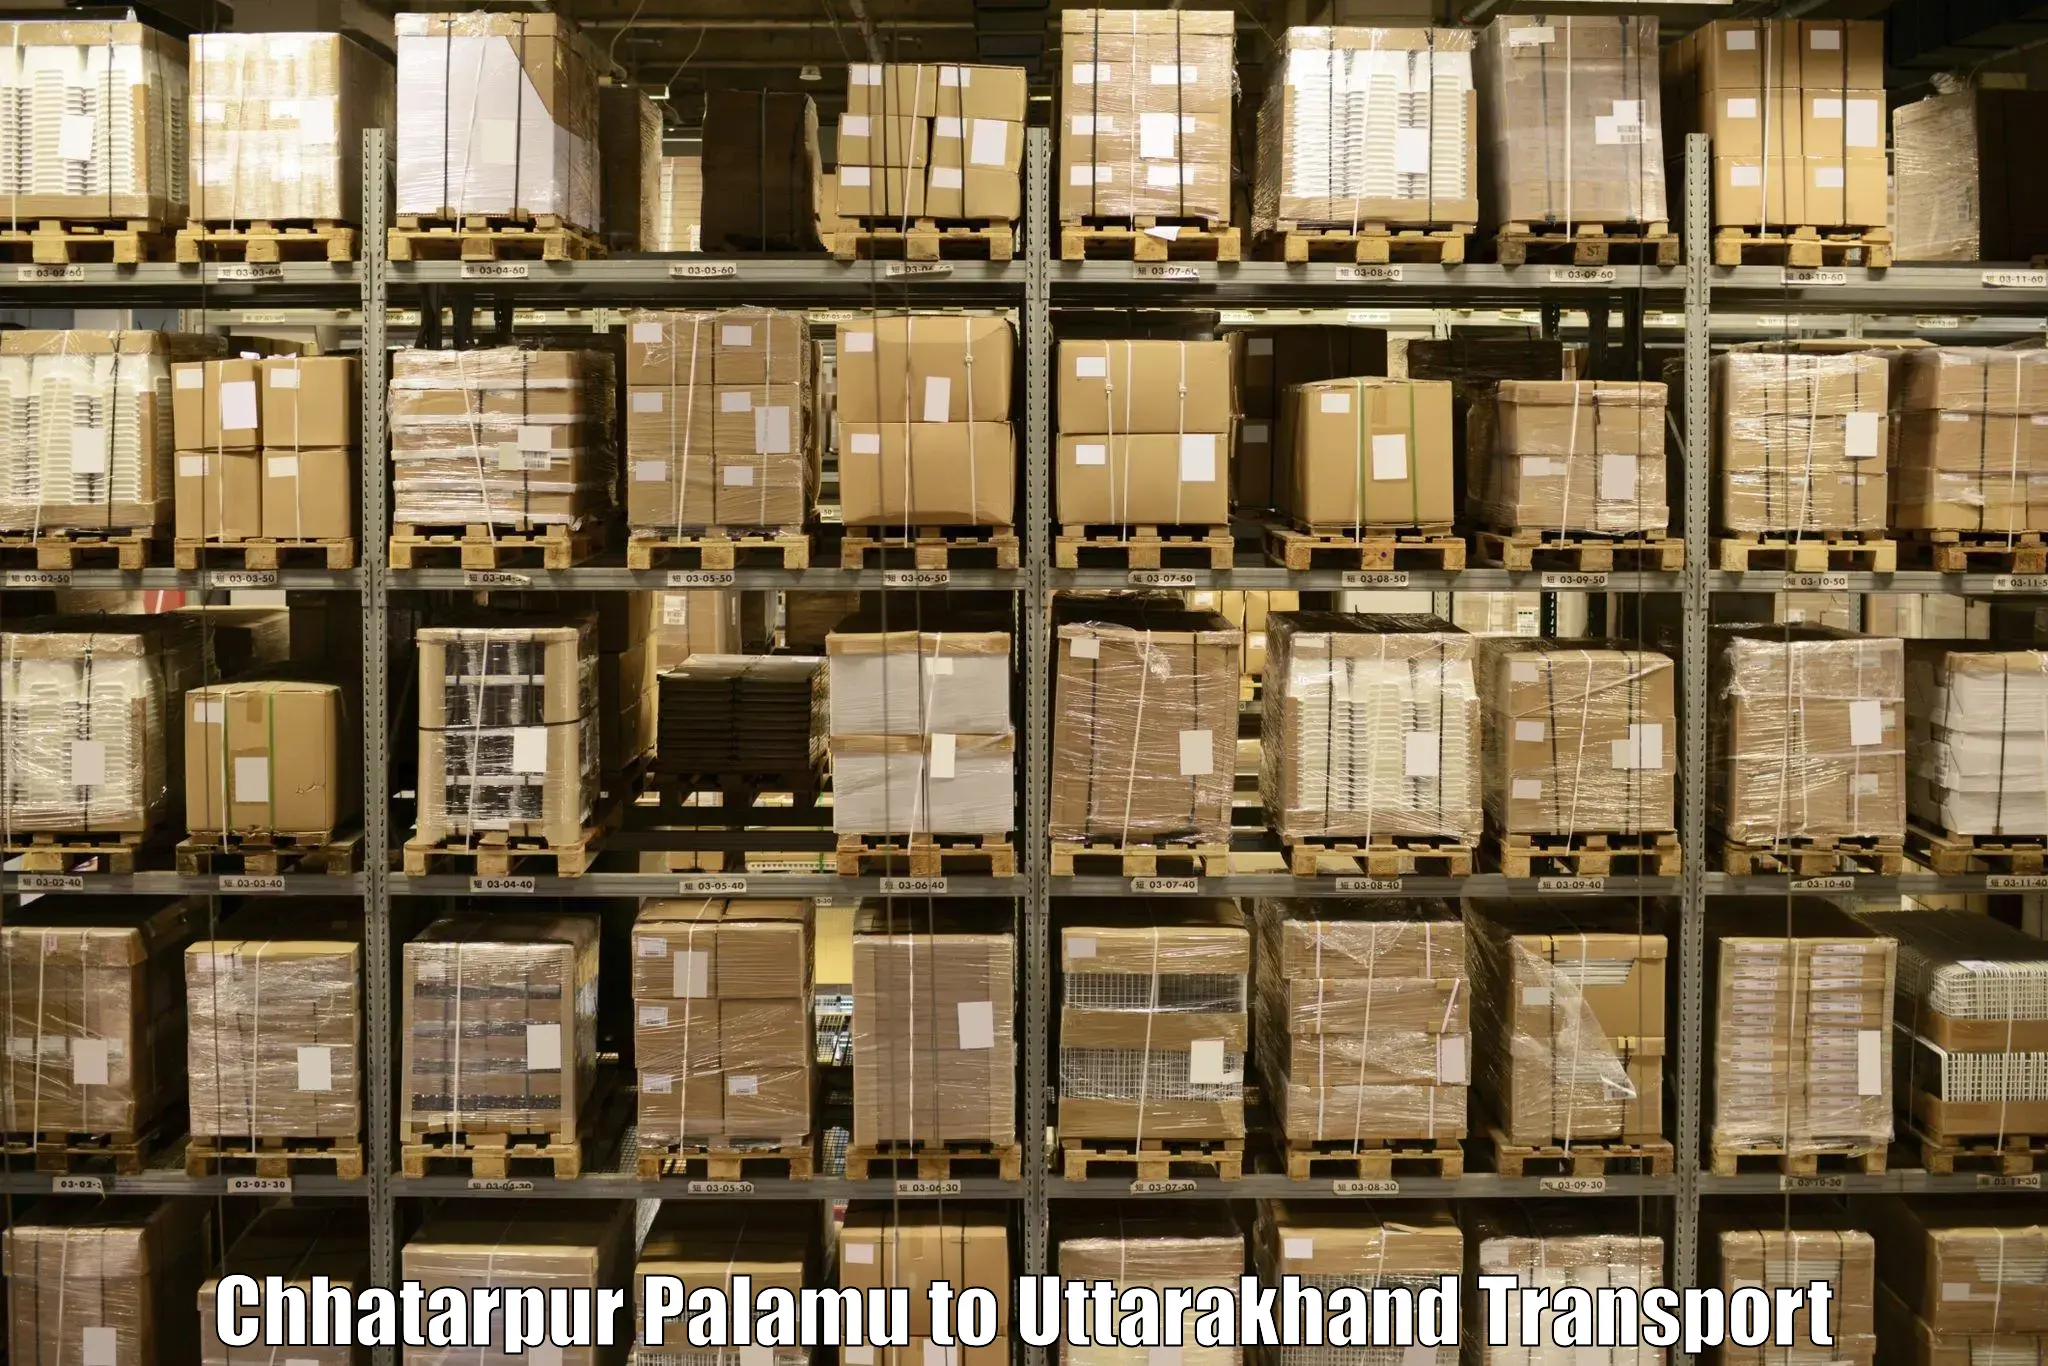 Parcel transport services in Chhatarpur Palamu to IIT Roorkee